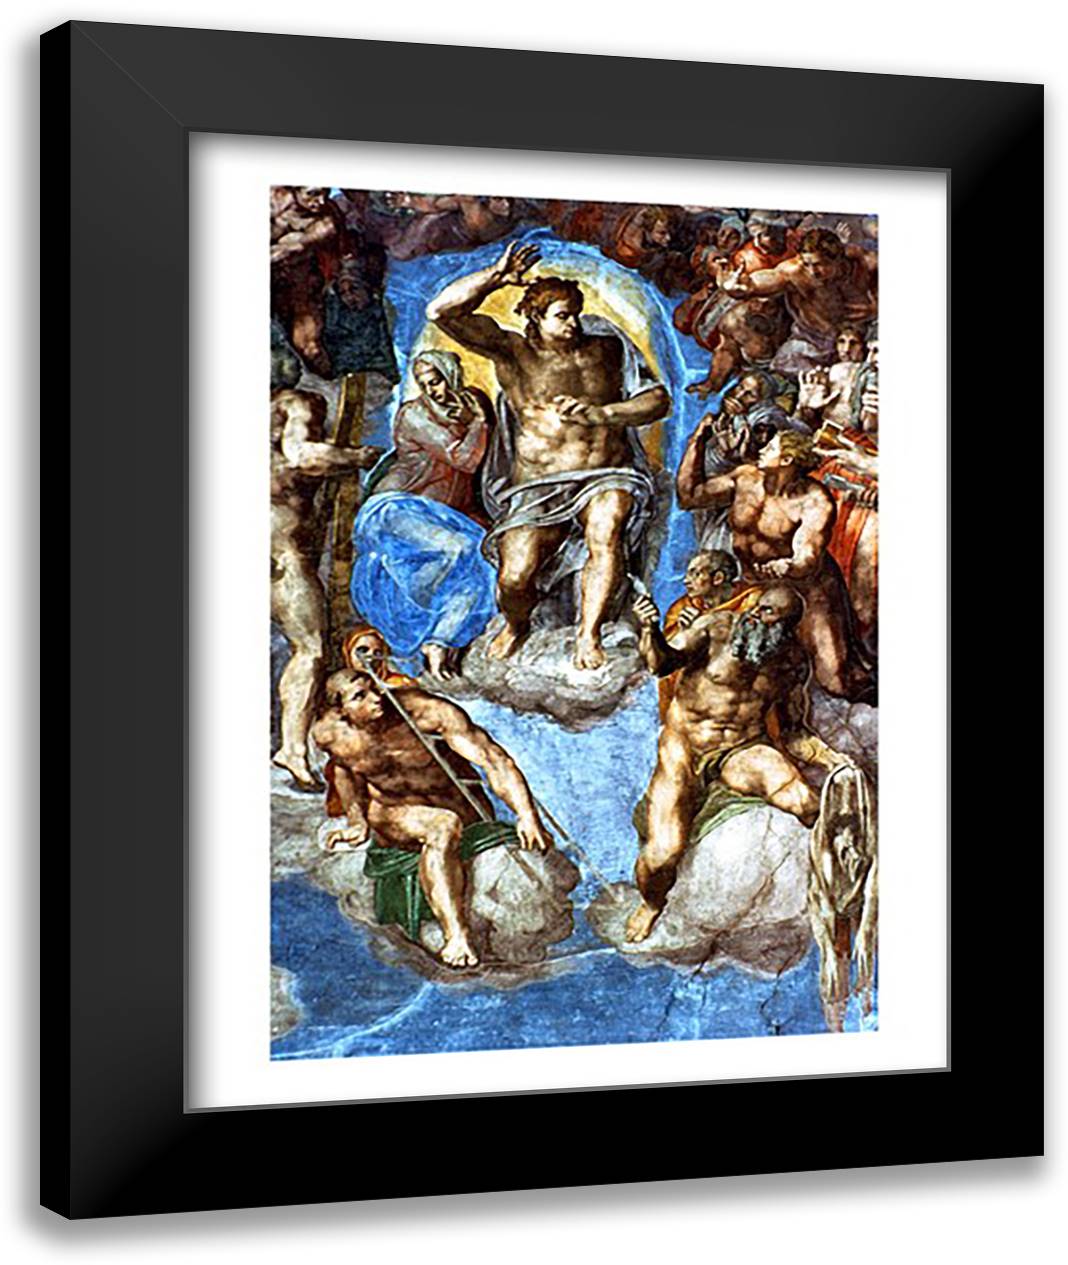 Christ, detail from 'The Last Judgement', in the Sistine Chapel 22x28 Black Modern Wood Framed Art Print Poster by Michelangelo